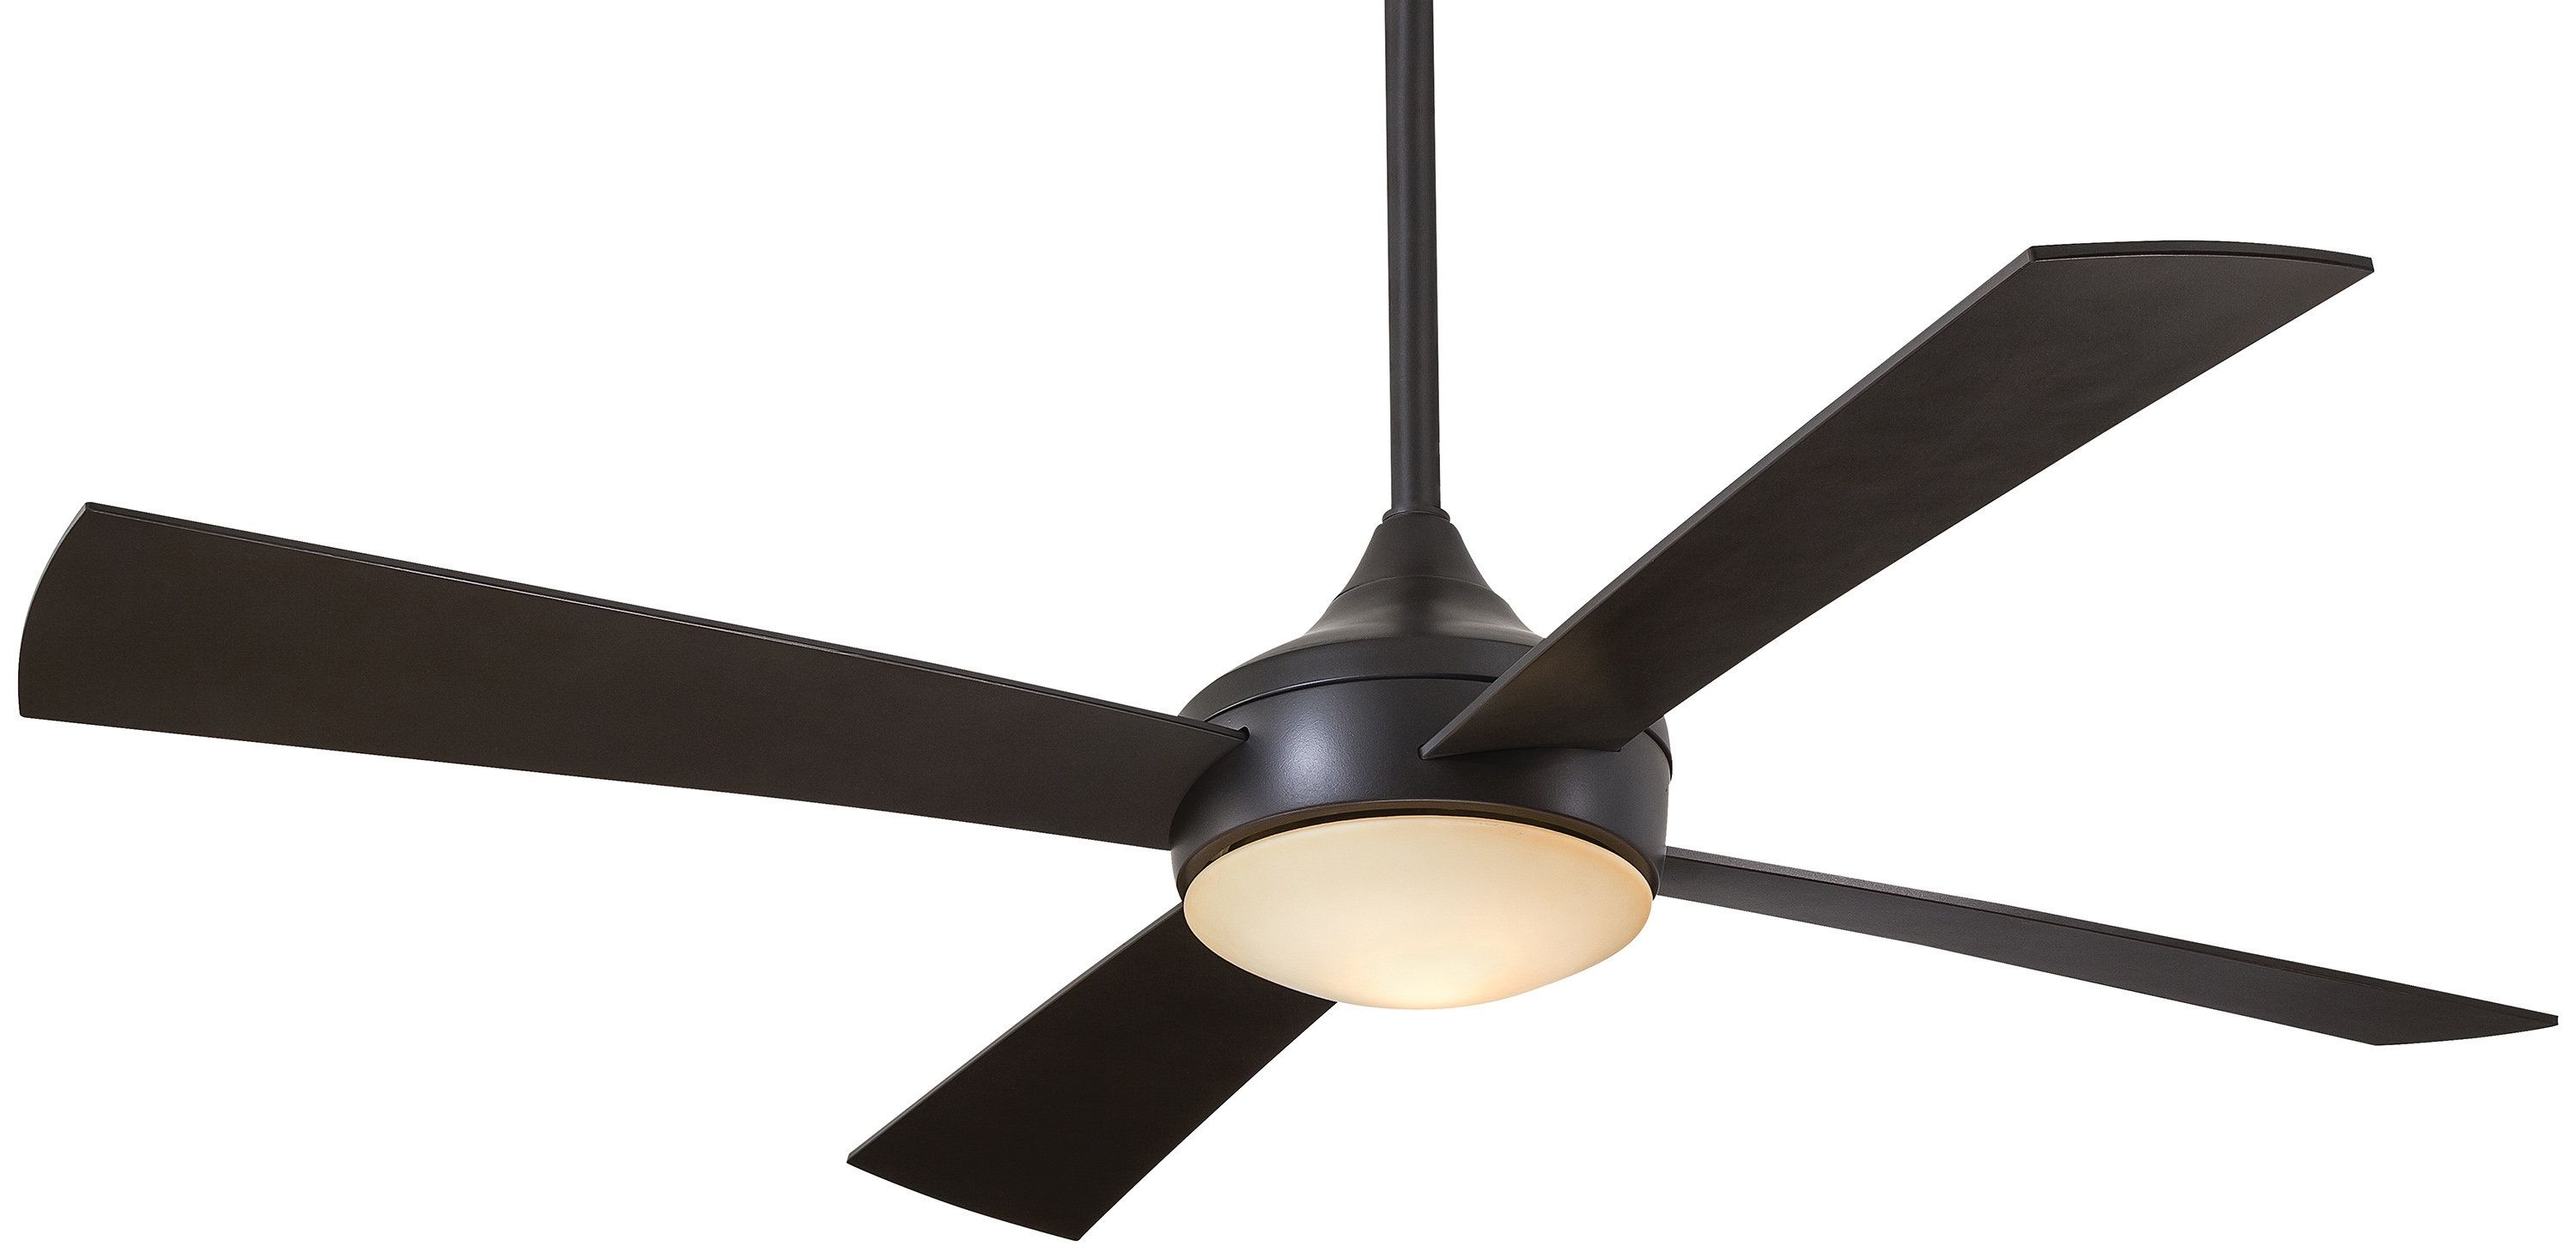 Minka Aire 52" Aluma Wet 4 Blade Outdoor Led Ceiling Fan With Remote Intended For Fashionable Outdoor Ceiling Fans With Aluminum Blades (View 14 of 20)